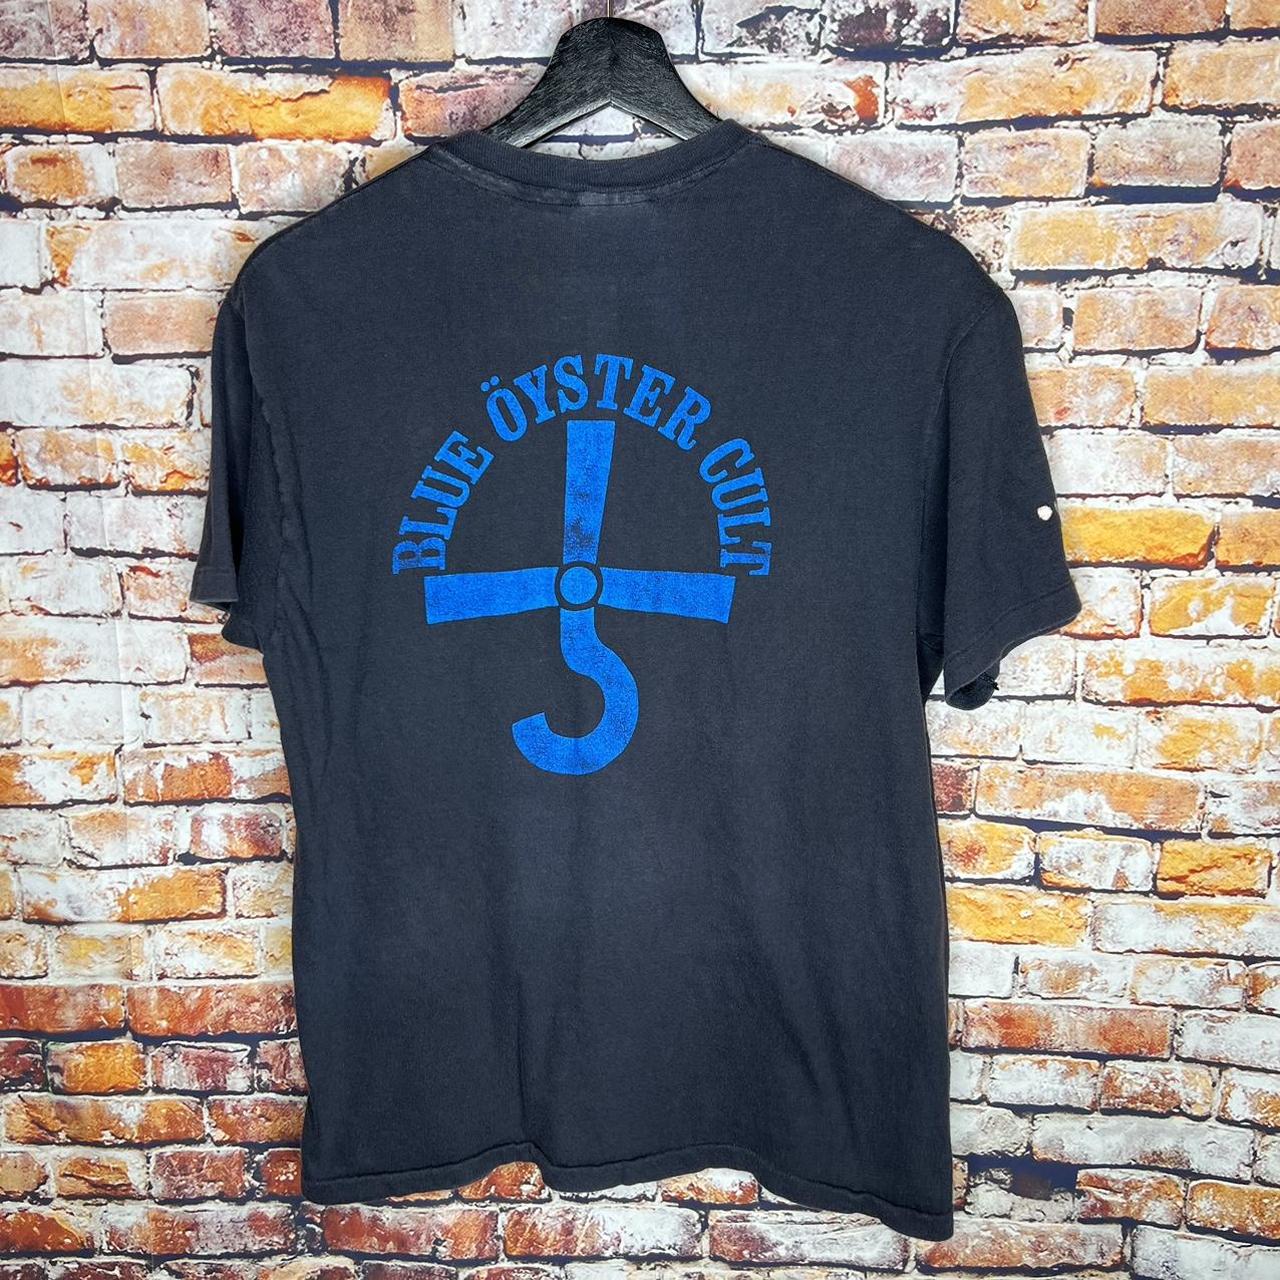 Vintage Blue Oyster Cult Band Tee T Shirt 80s, Size: